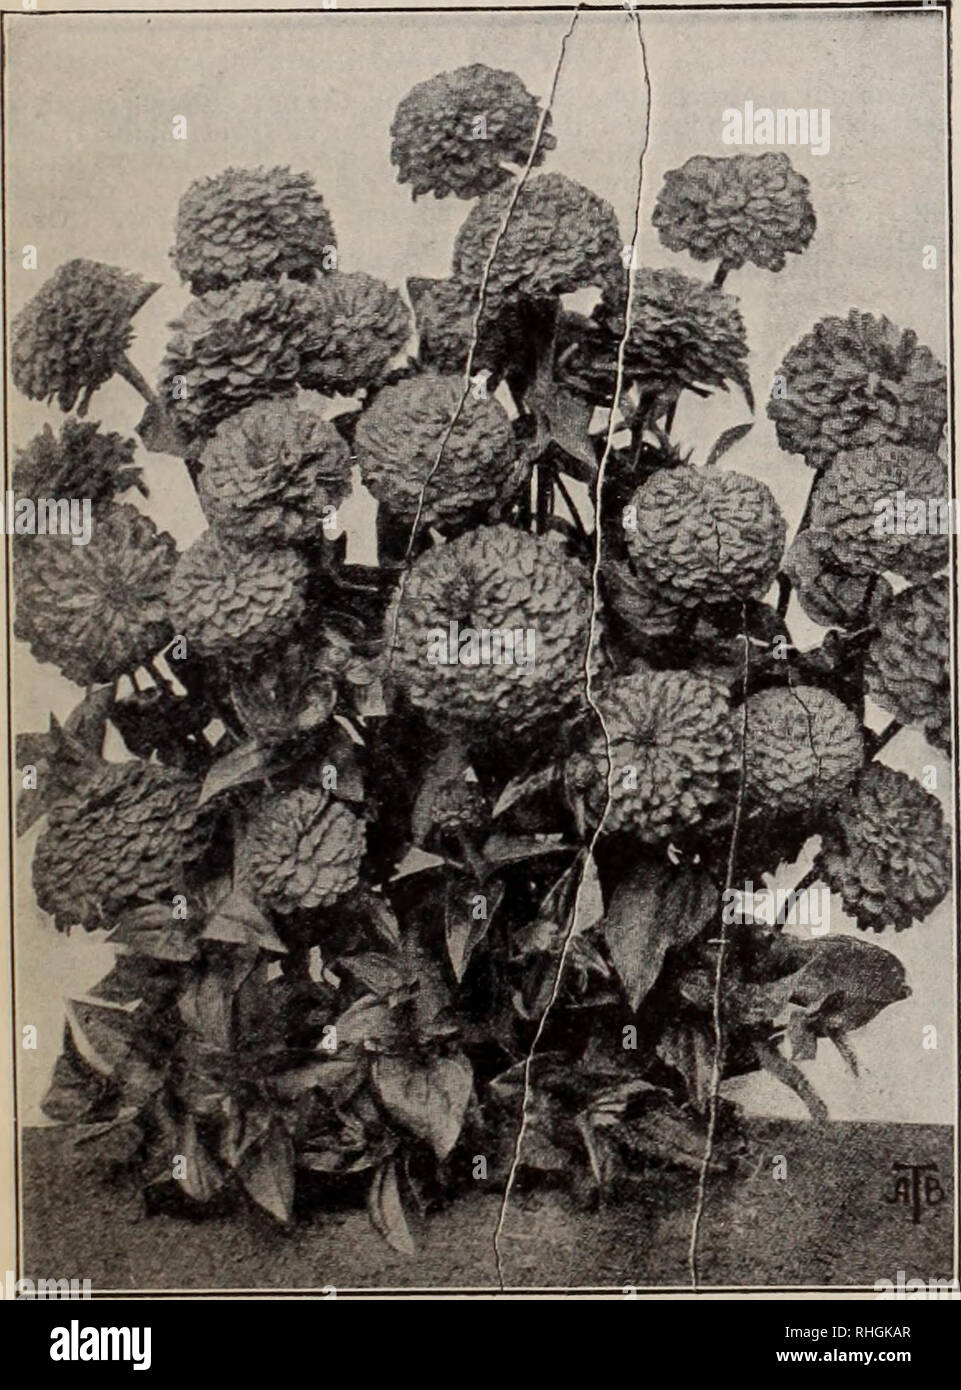 . Boddington's quality bulbs, seeds and plants / Arthur T. Boddington.. Nursery Catalogue. BODDINGTONS ^A^CltllV SEEDS 59 Trachelium coeruleum. (G.S.) A free-growing greenhouse annual of easy culture, having large cloud-like heads of clear pale mauve flowers somewhat resembling Gypsophila. Height, i8 in. Pkt. 25 cts., 5 pkts. for $1. TRITOMA (Red-Hot-Poker; Flame Flower). H.P. 4ft. Pkt. New sorts, mixed. Summer $0 25 TROLLIUS (Globe Flower). H.P. 2 ft. Summer. Caucasicus ( Golden Globe). Yellow 10 Japonicus fl. pi. Double yellow ^oz., $1.25.. 25 New Hybrids. Mi.xed 25 TOBACCO, see Nicotiana. T Stock Photo